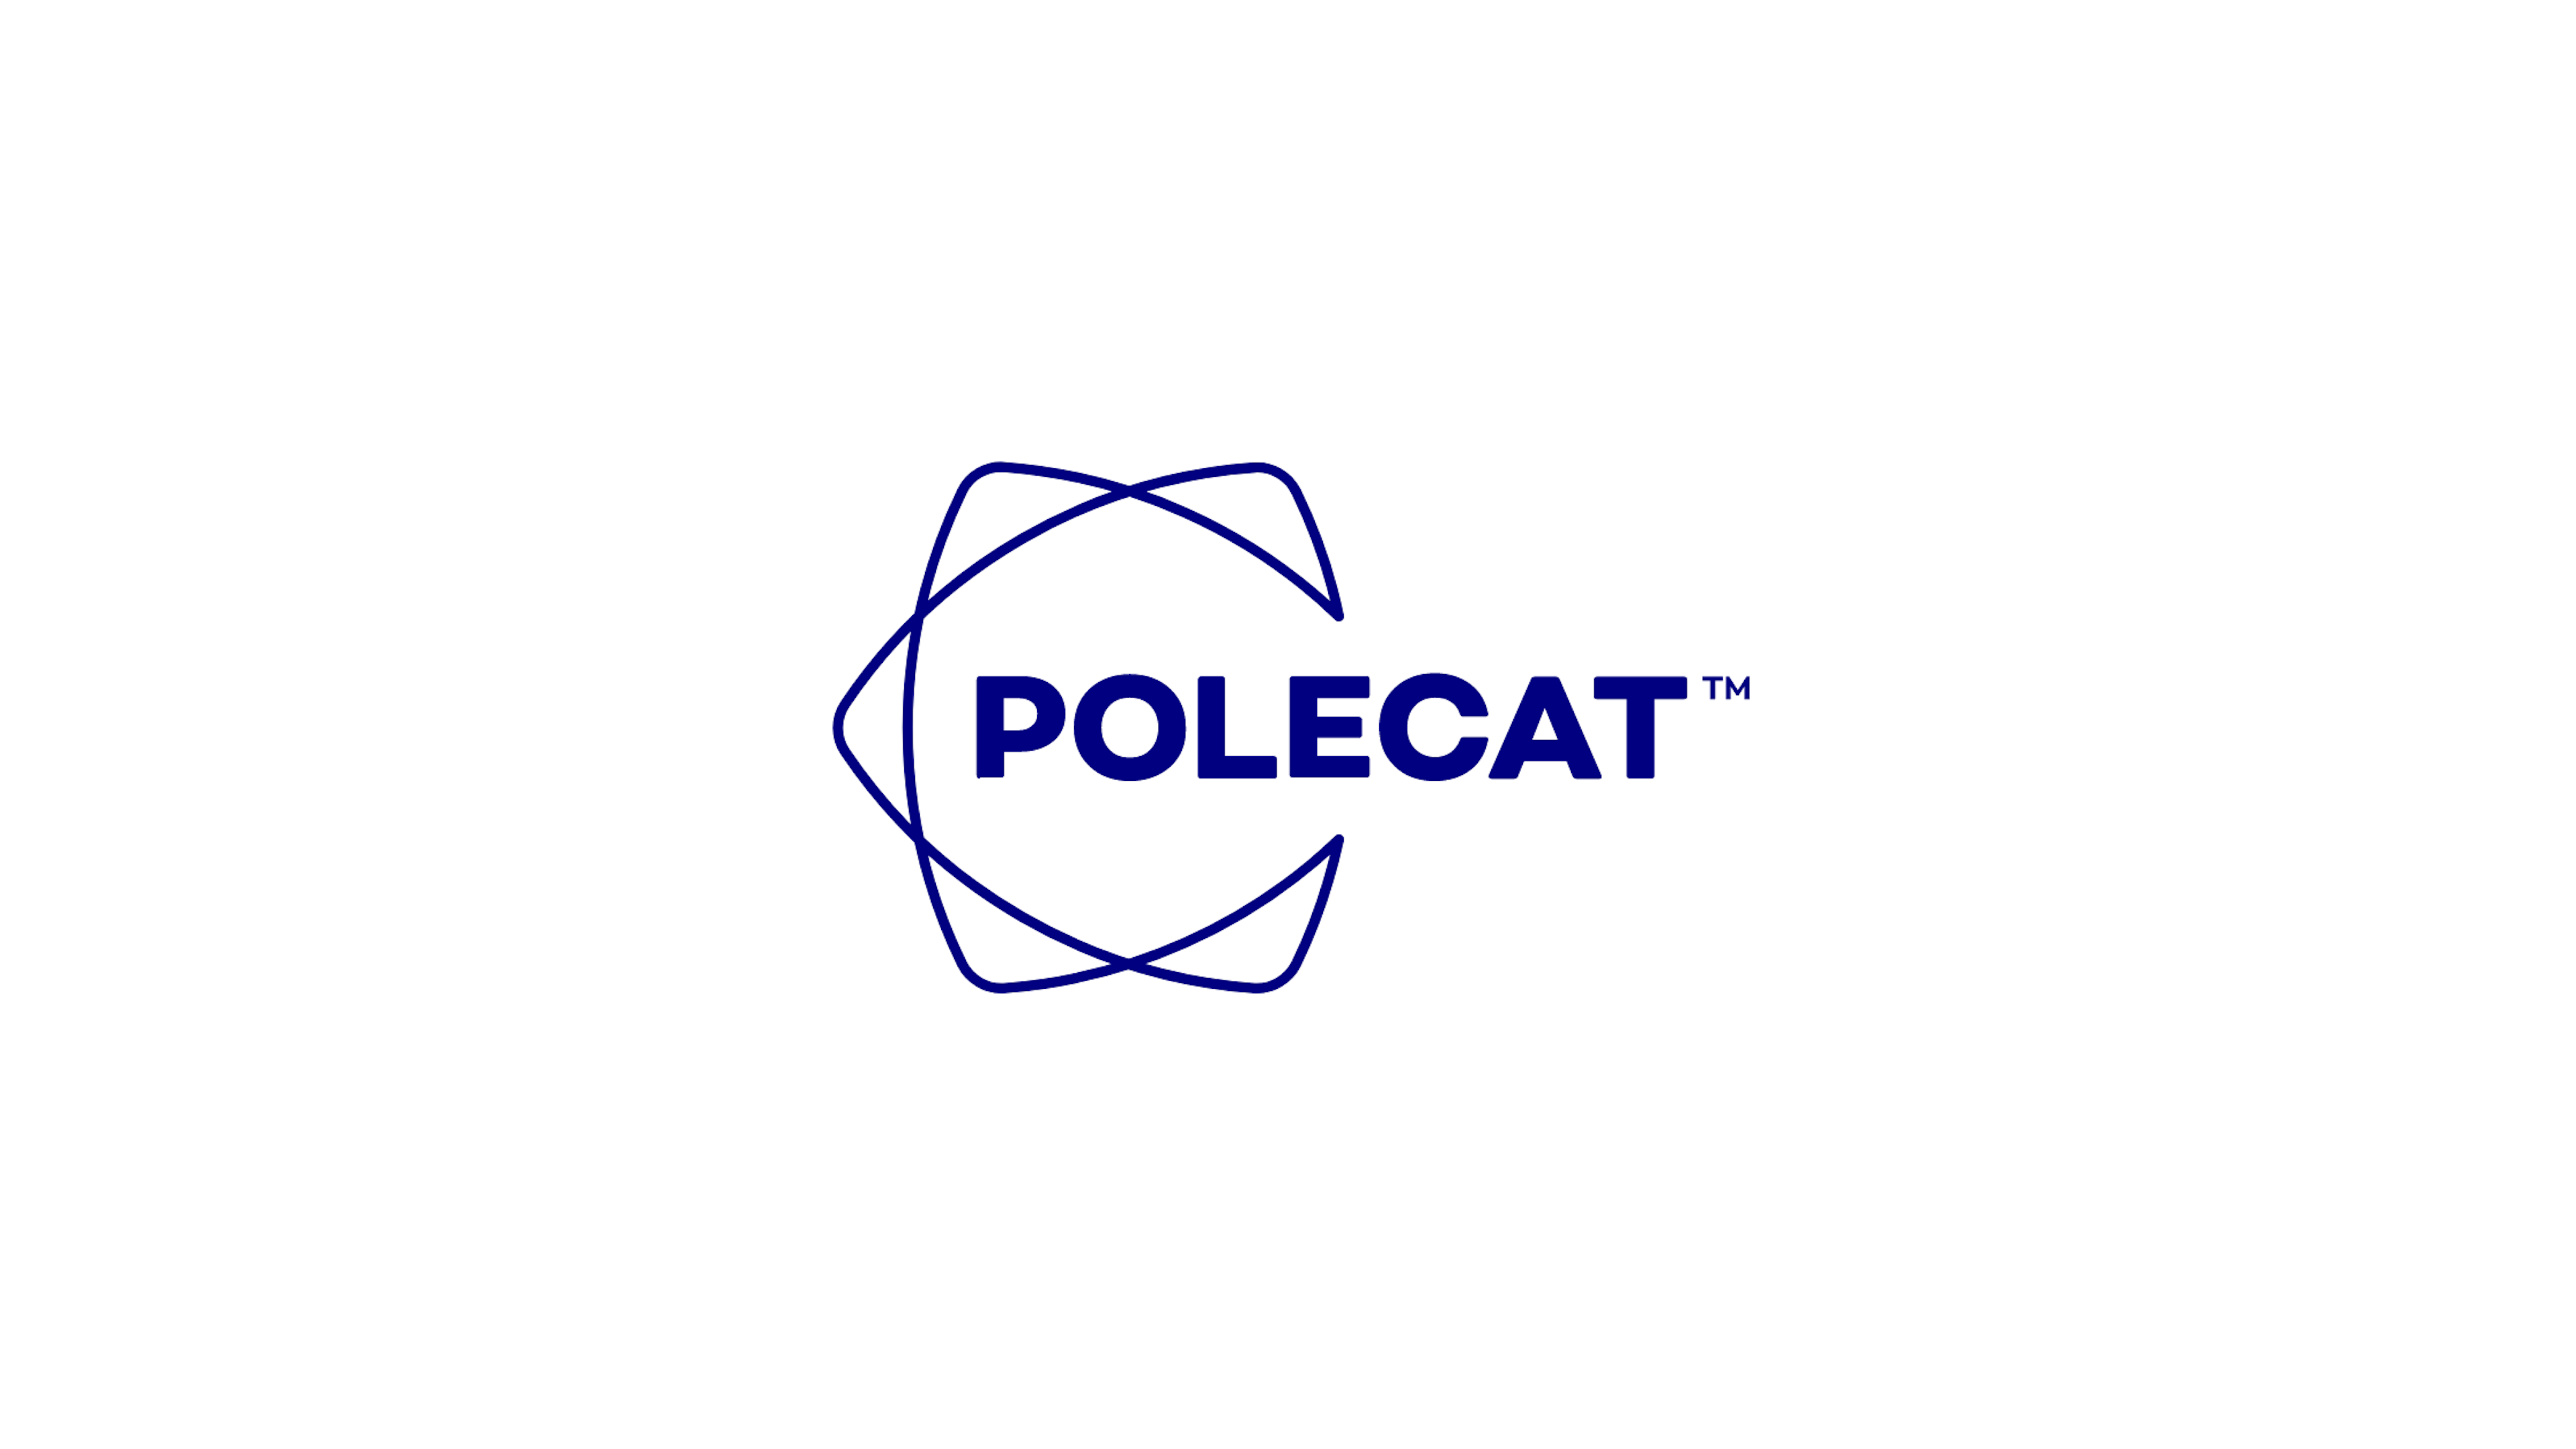 Functional Workplaces: How Polecat Intelligence - a Leader in Reputation Intelligence - uses Clojure